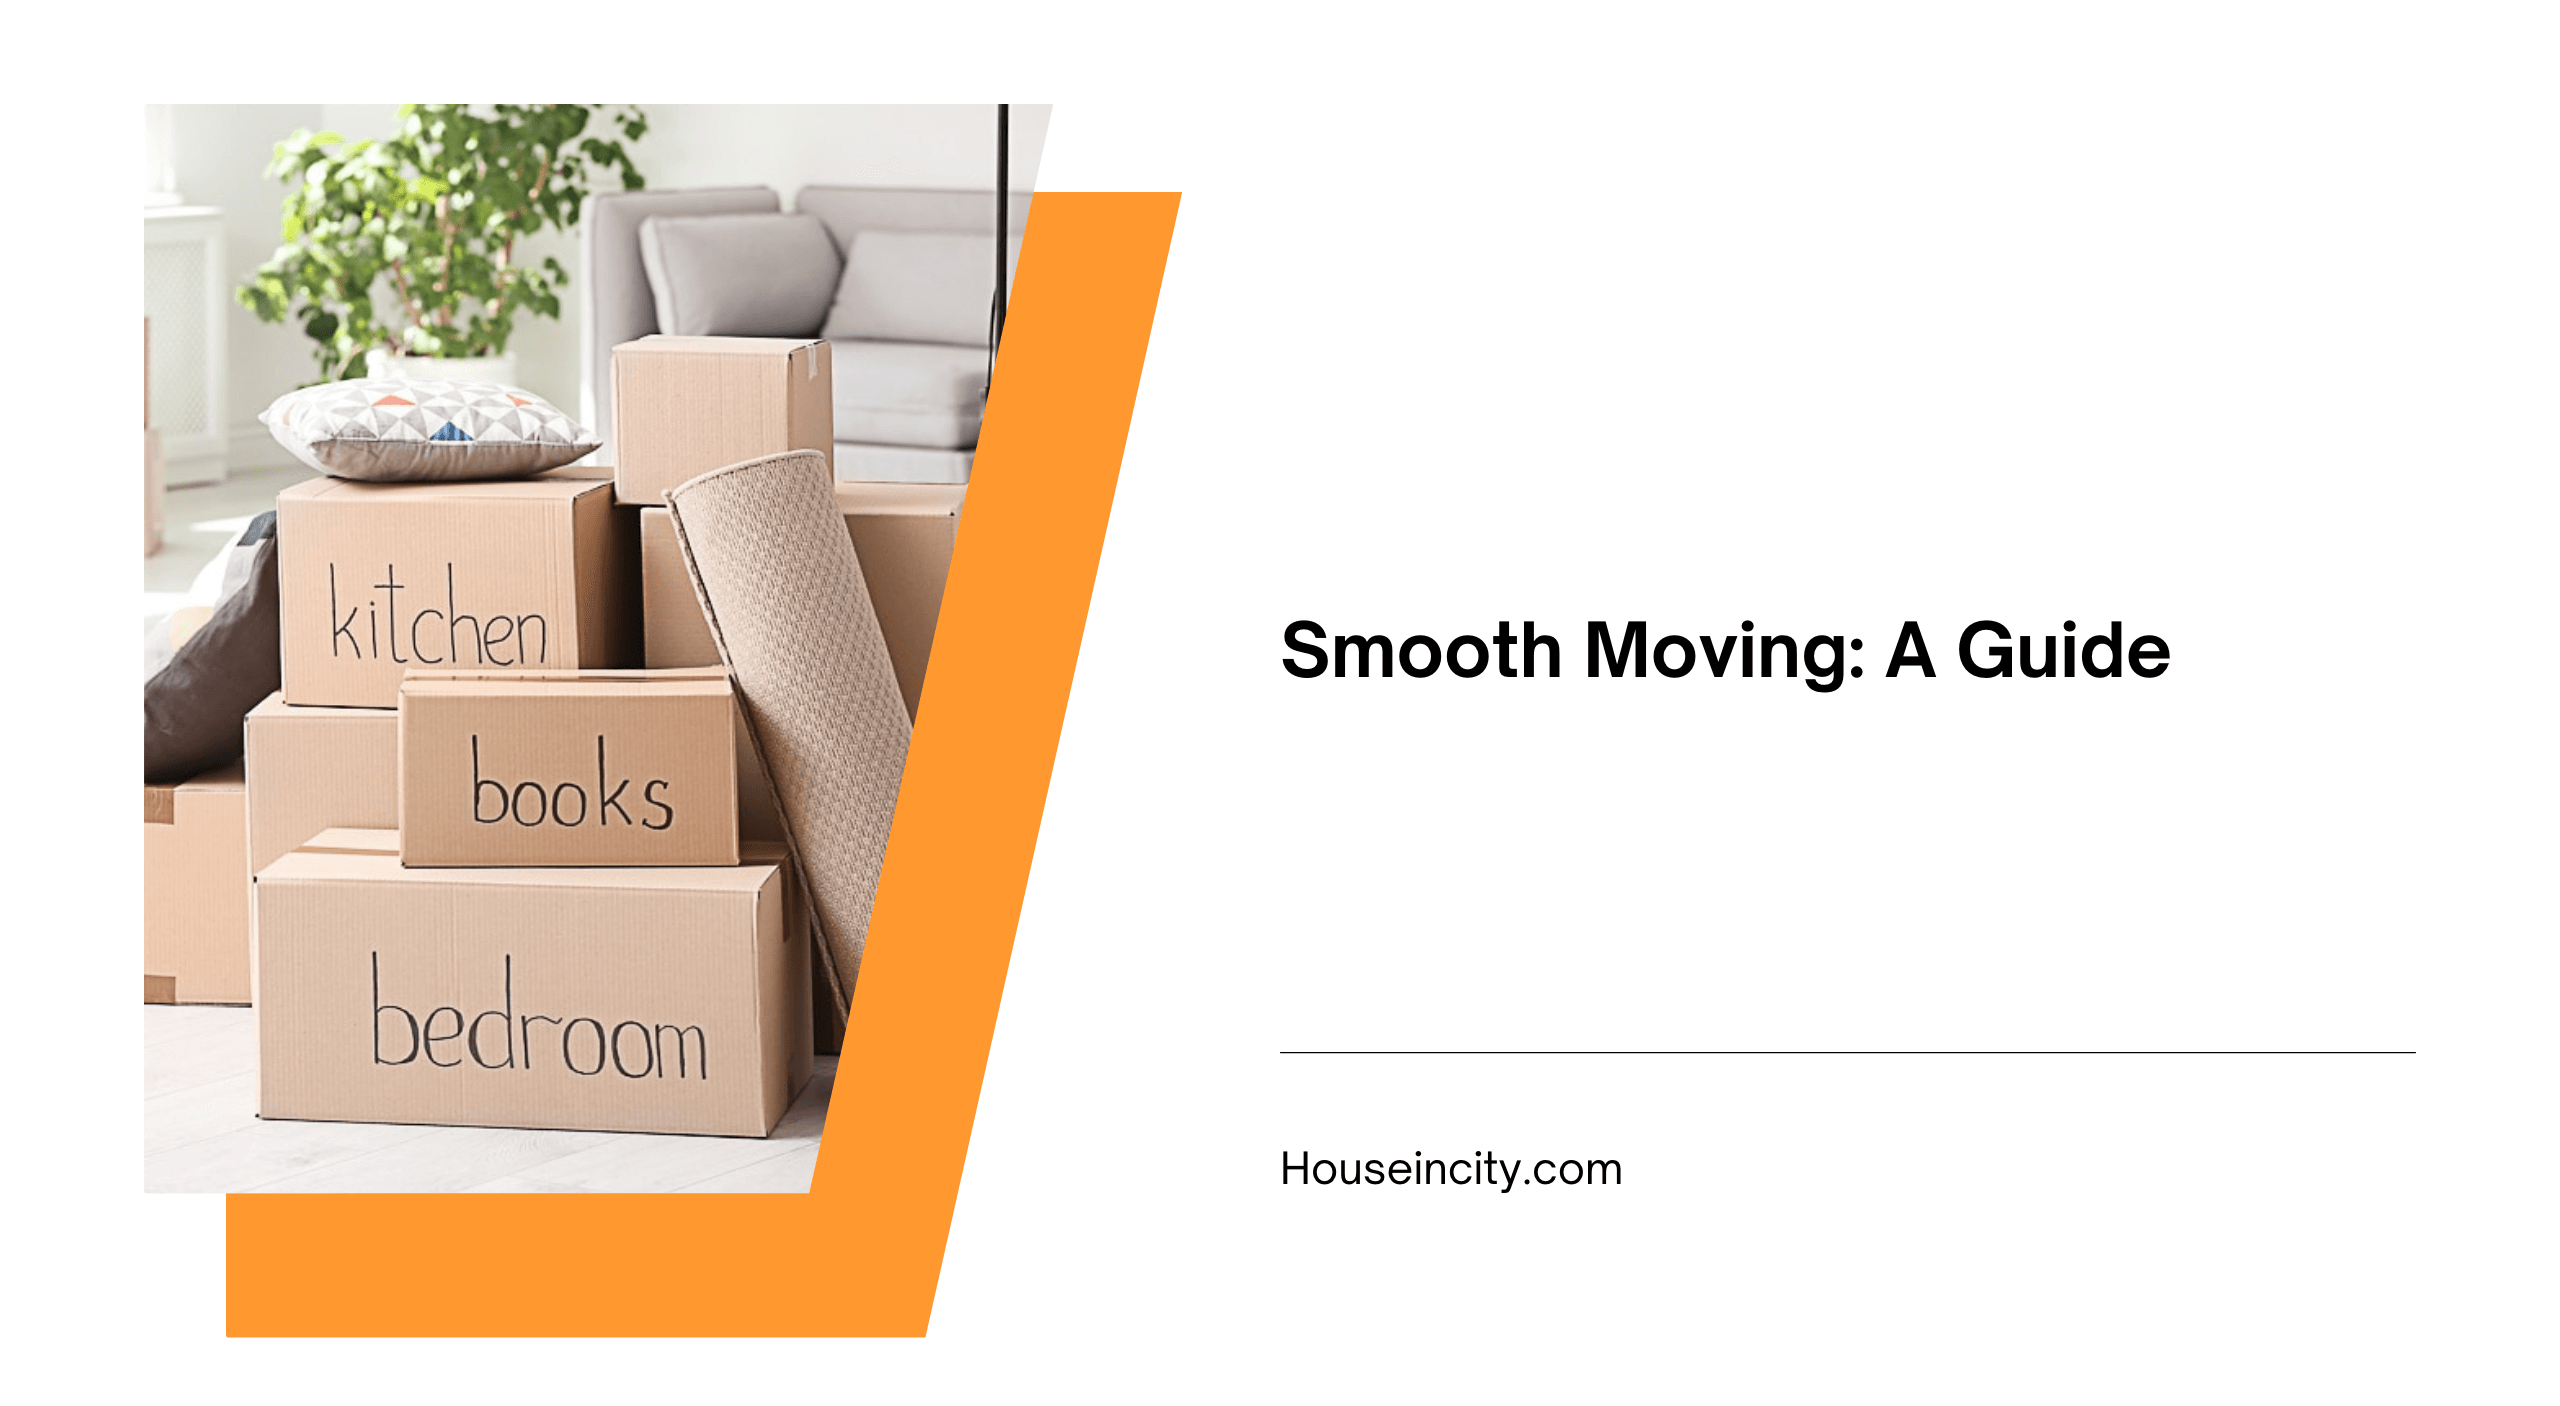 Smooth Moving: A Guide